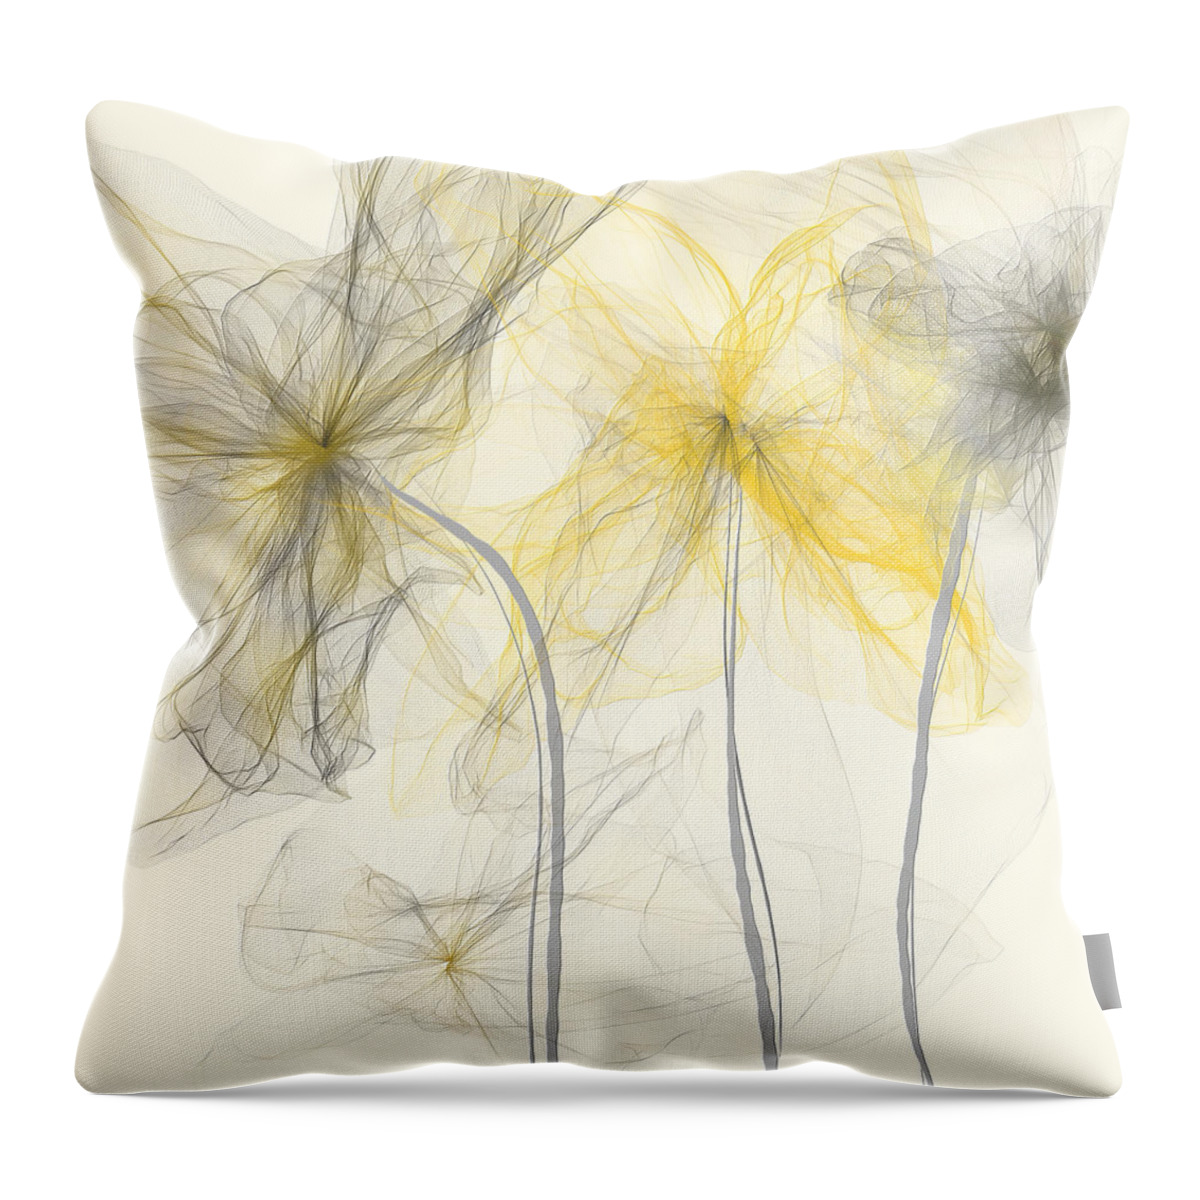 Yellow Throw Pillow featuring the painting Yellow And Gray Flowers Impressionist by Lourry Legarde